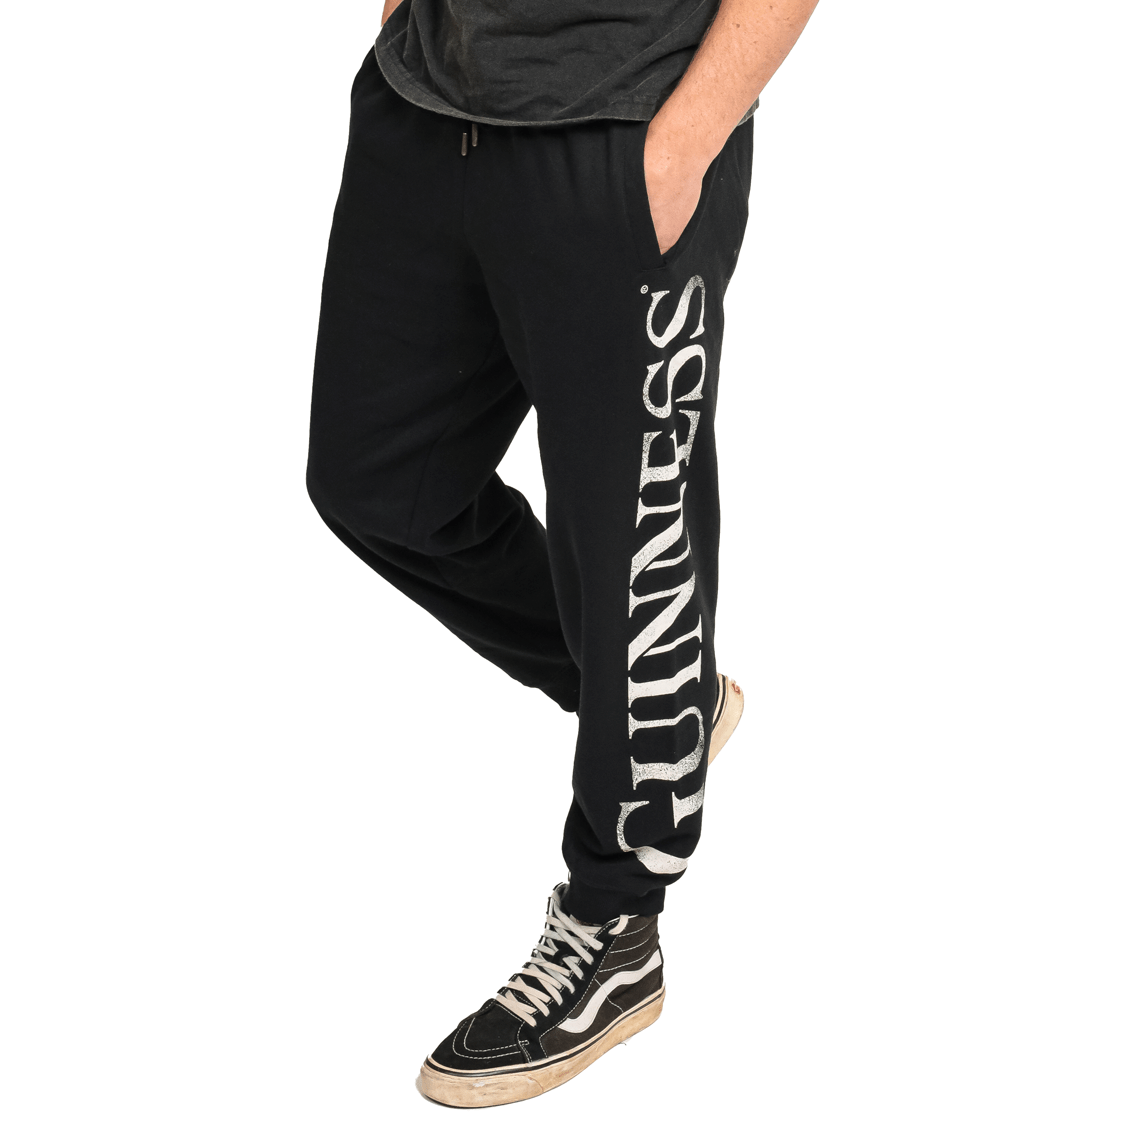 Guinness Guinness Joggers in organic cotton.